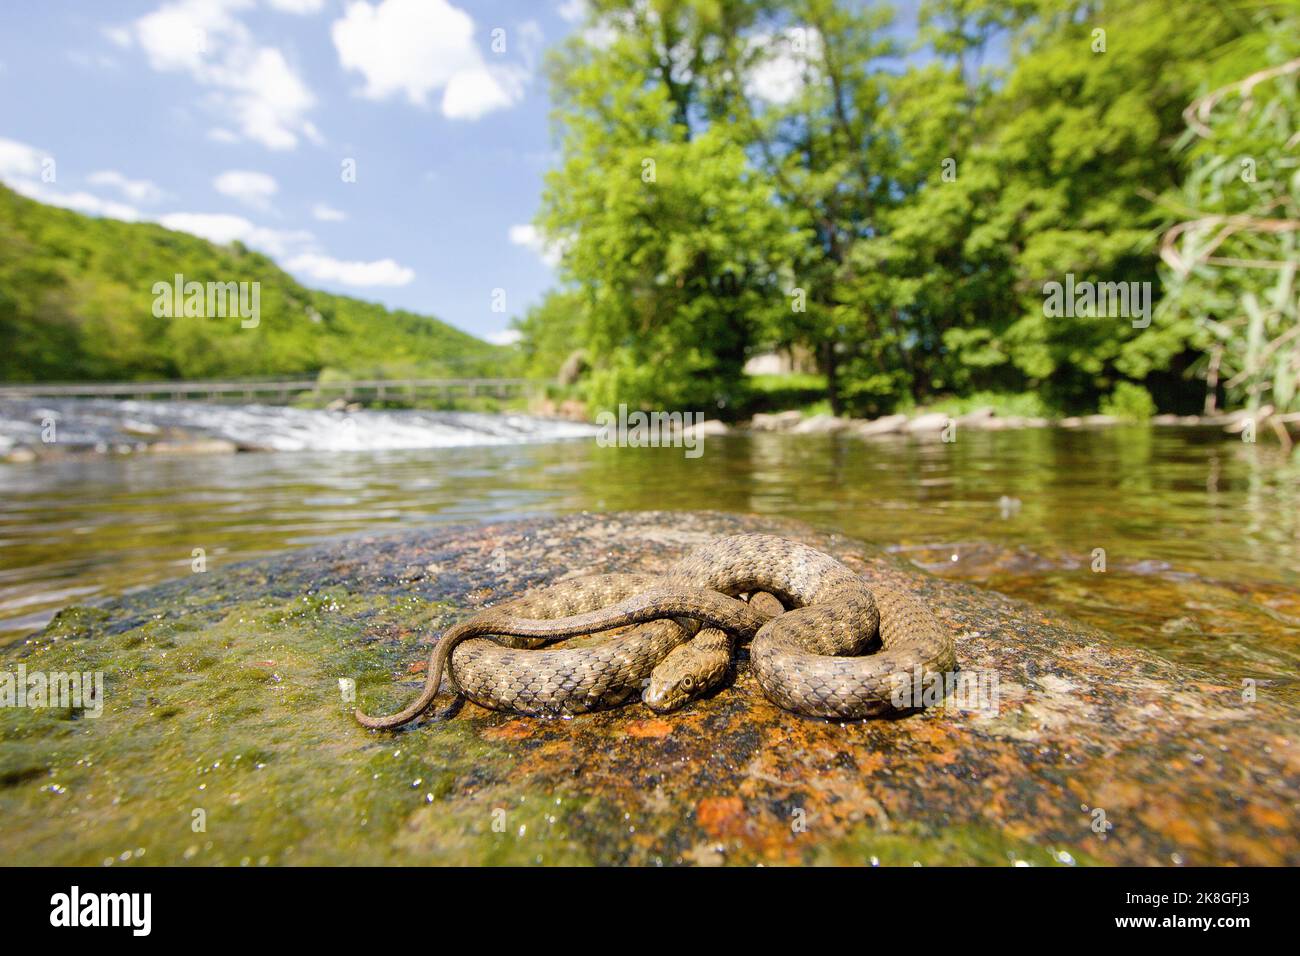 Dice snake (Natrix tessellata) on the stone in the middle of the river Stock Photo